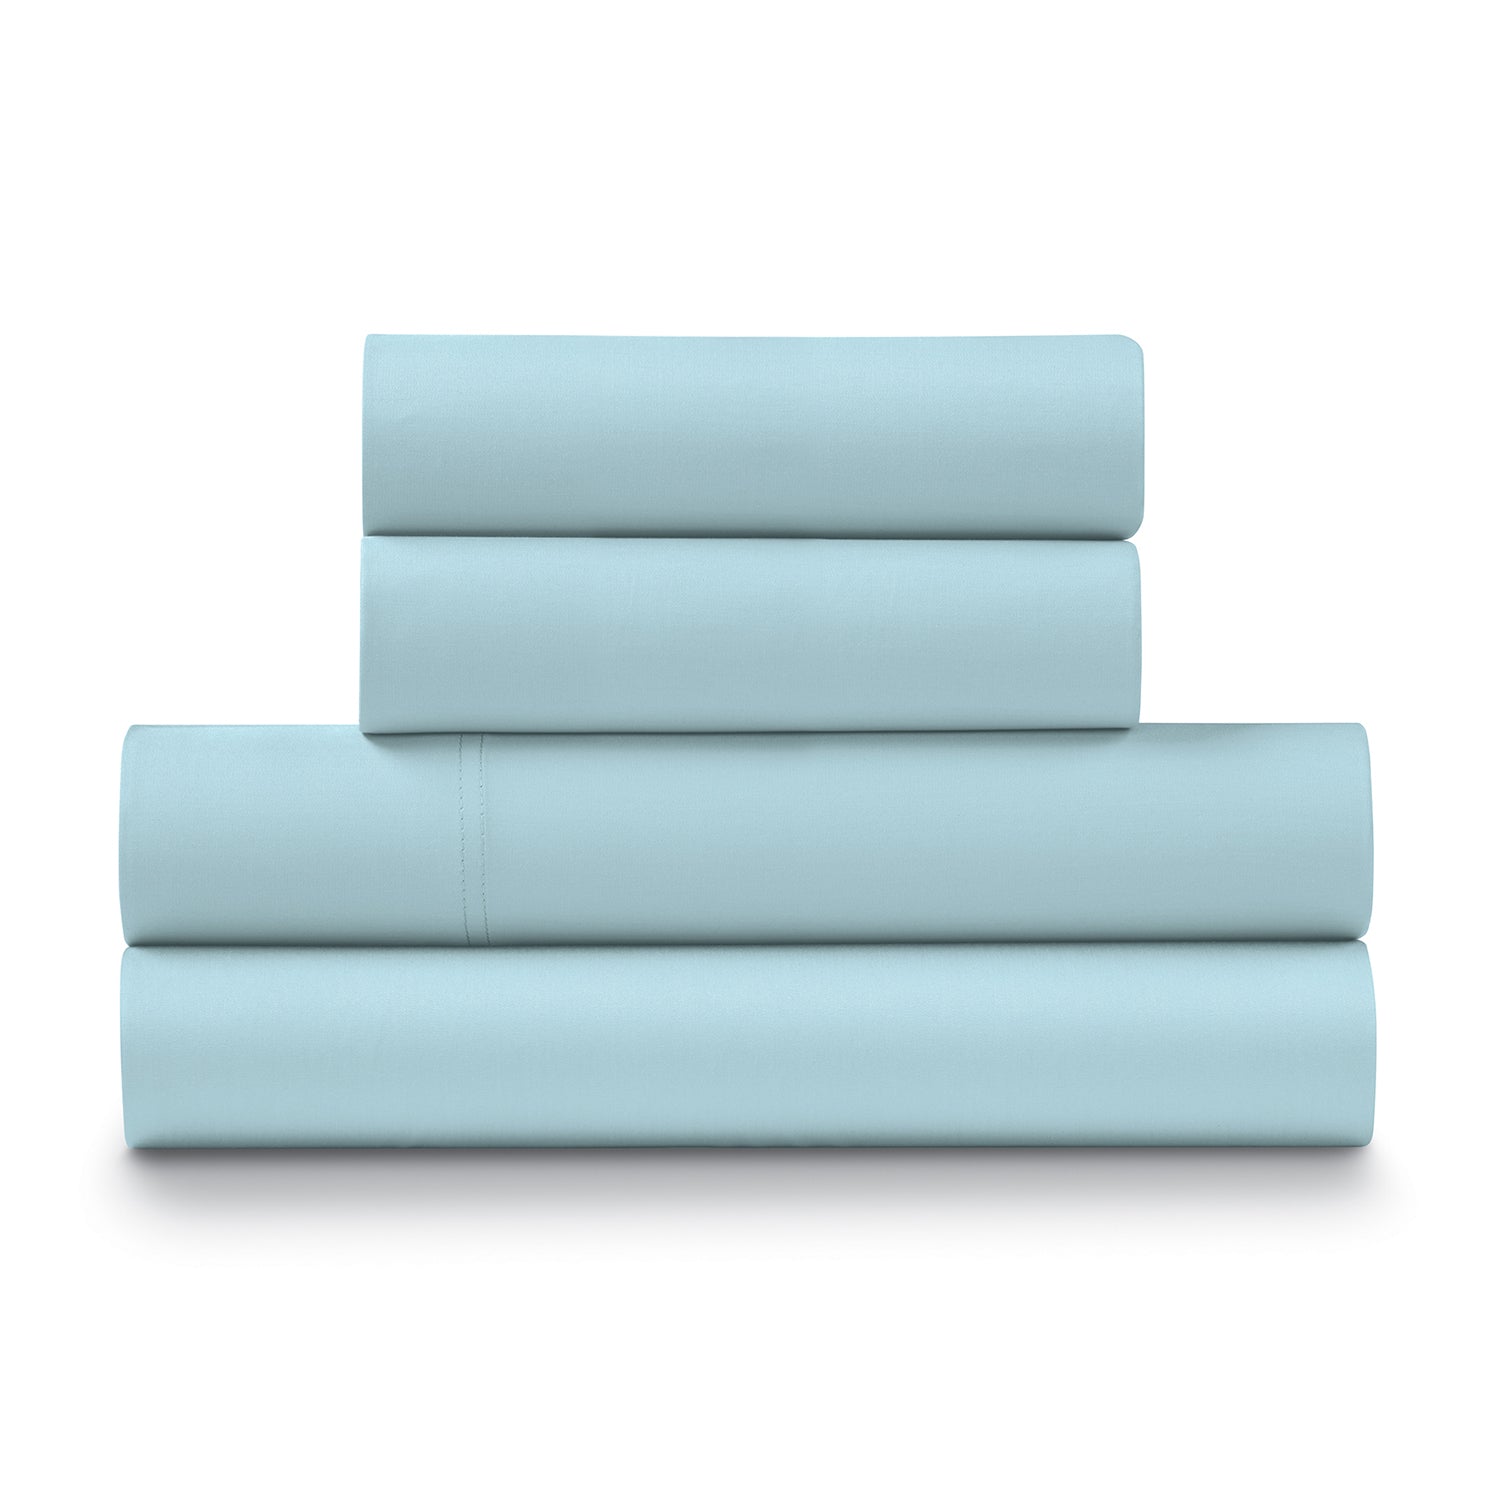 Introducing: Thick and Crisp Heavy Cotton Sheets - The Good Sheet